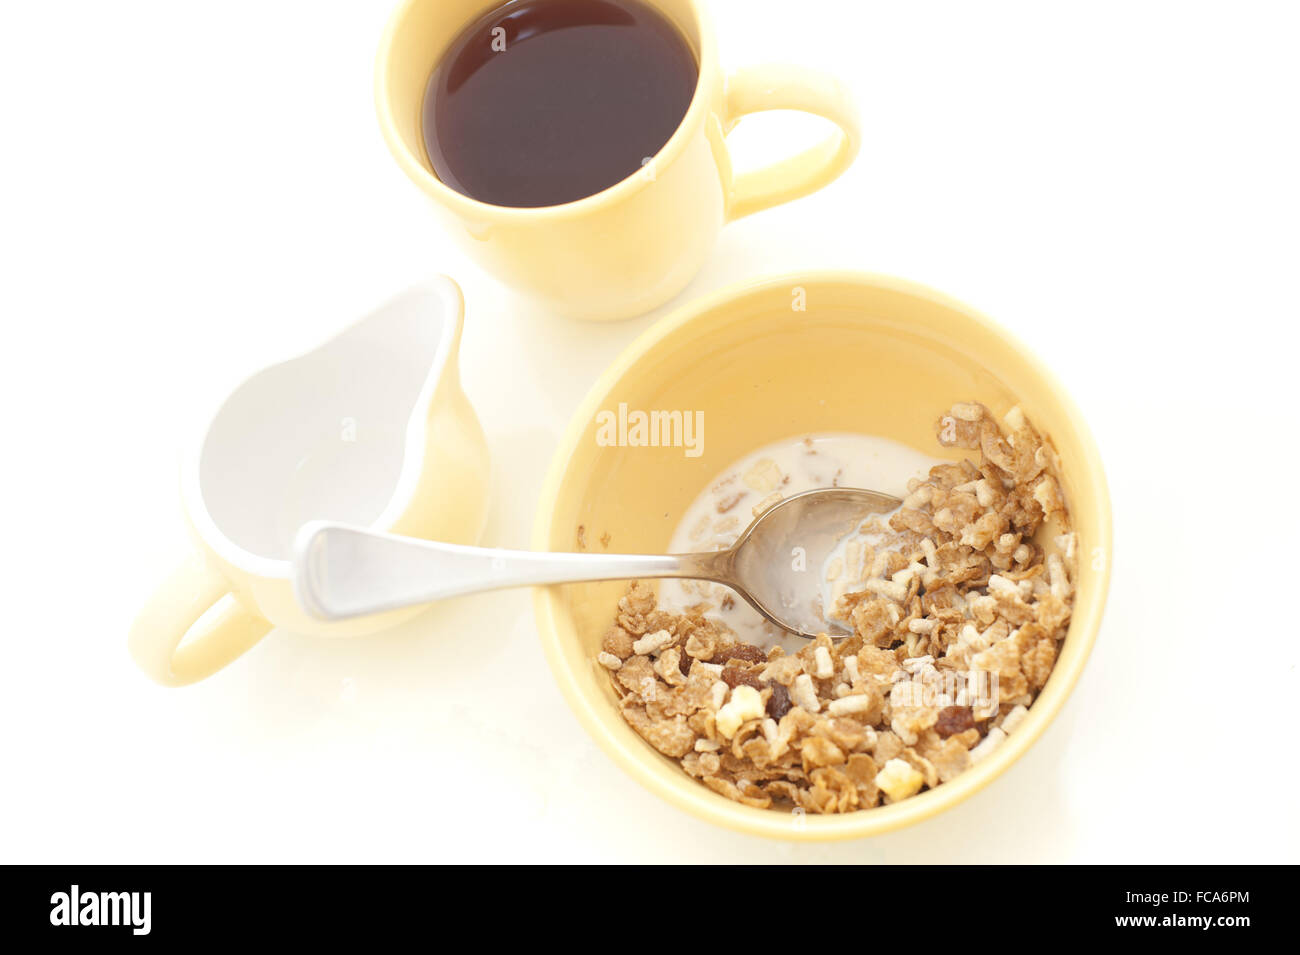 Bowl of muesli and coffee for breakfast Stock Photo